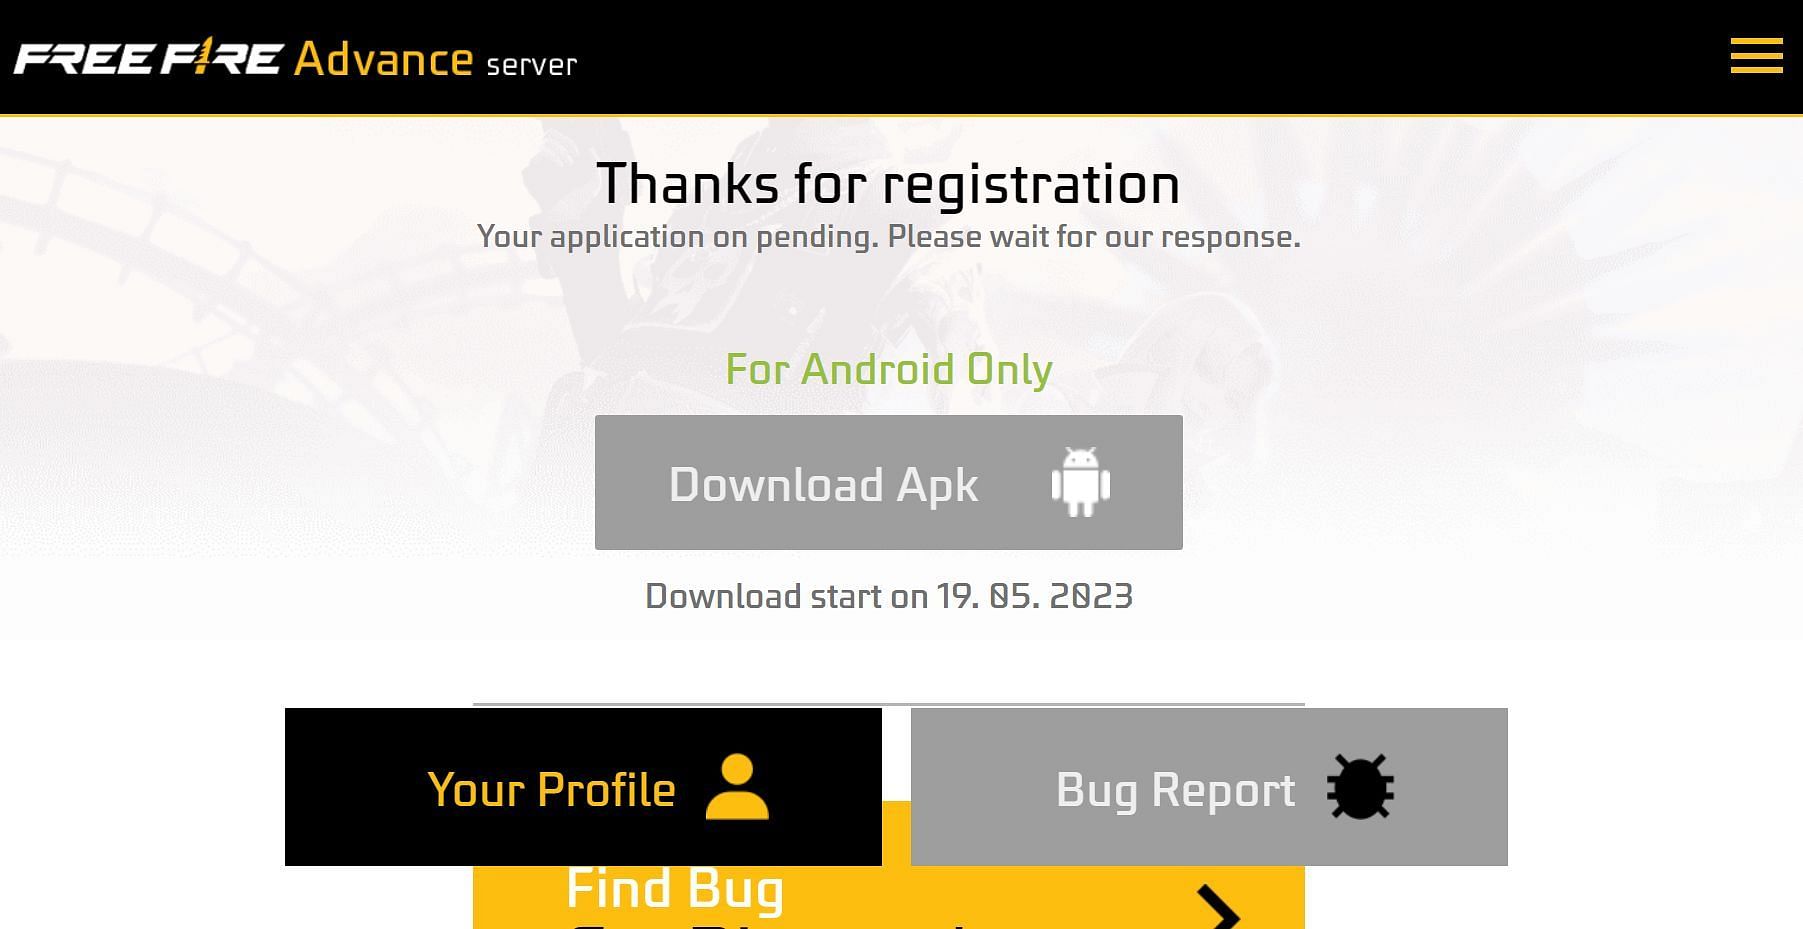 You may download the Advance Server starting from May 19 (Image via Garena)